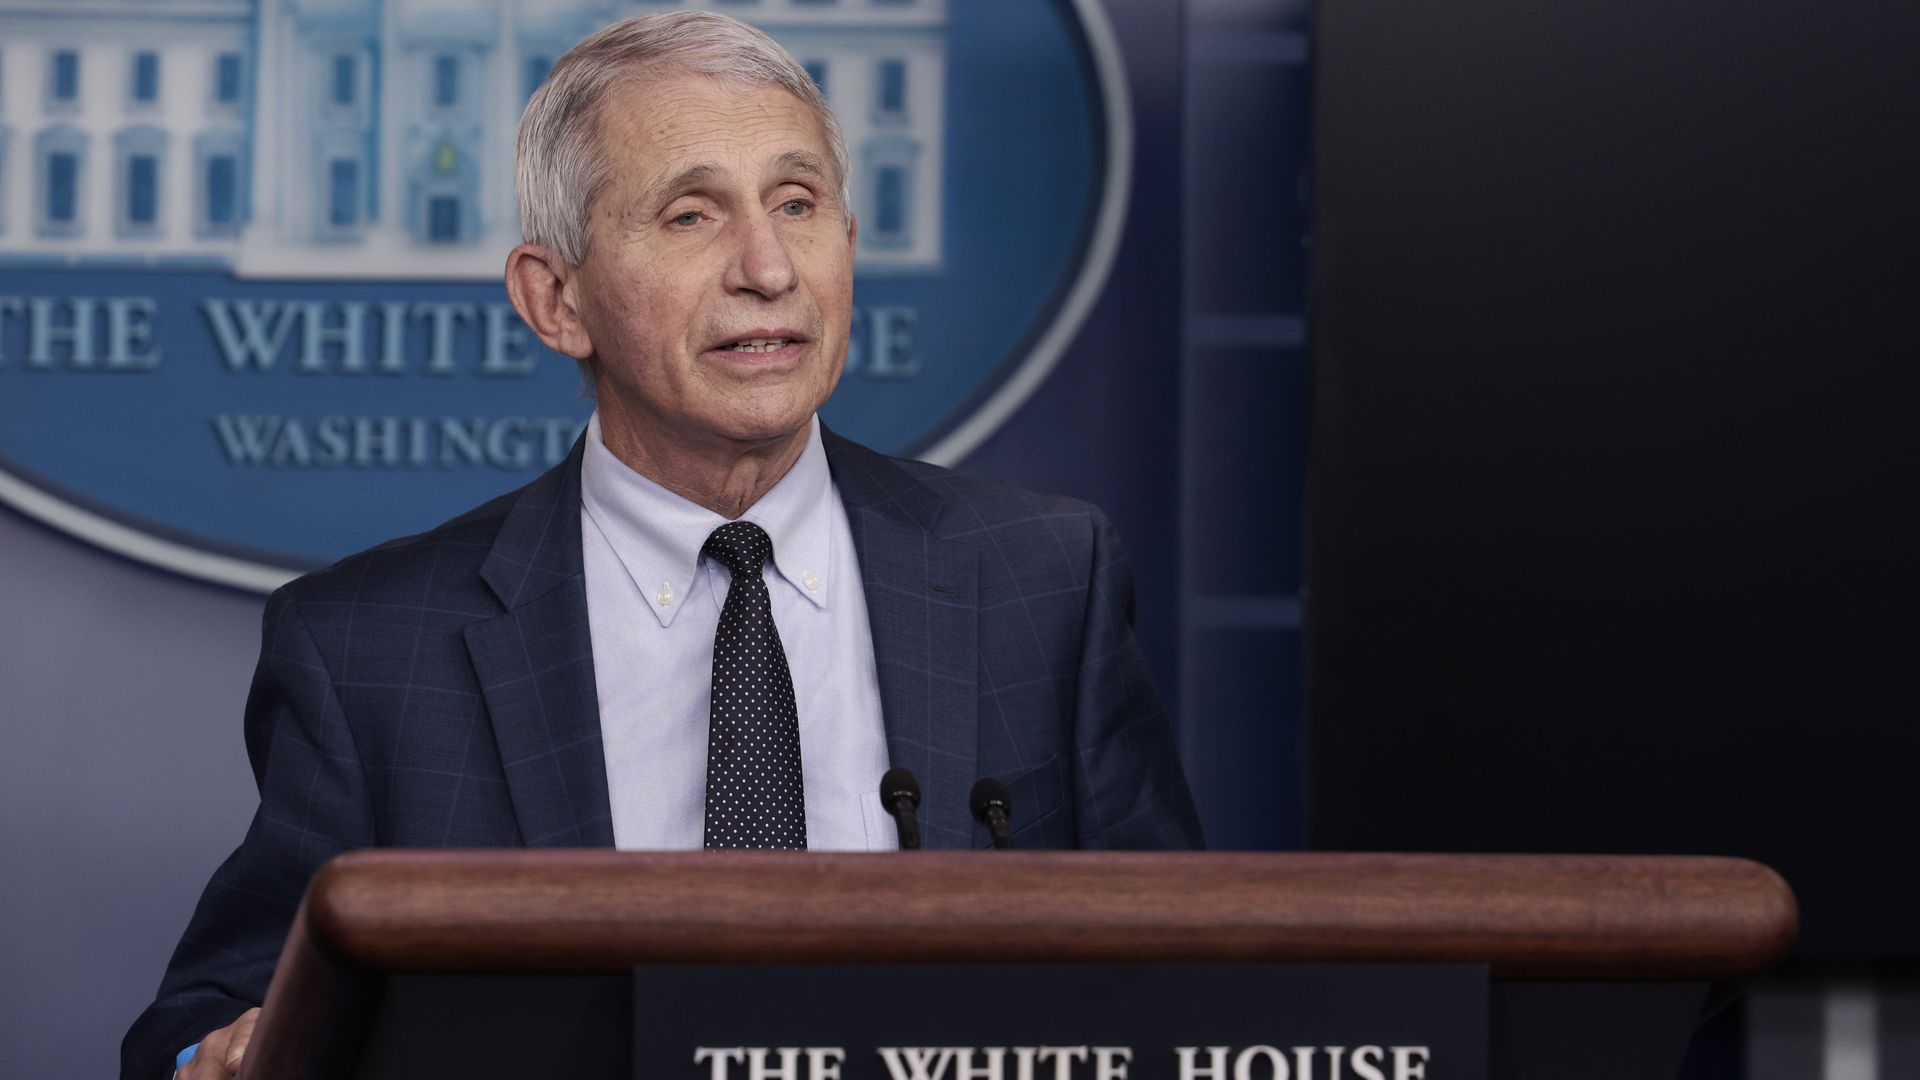   Anthony Fauci, Chief Medical Advisor to the President, gives an update on the Omicron COVID-19 variant during the daily press briefing at the White House on December 01. 